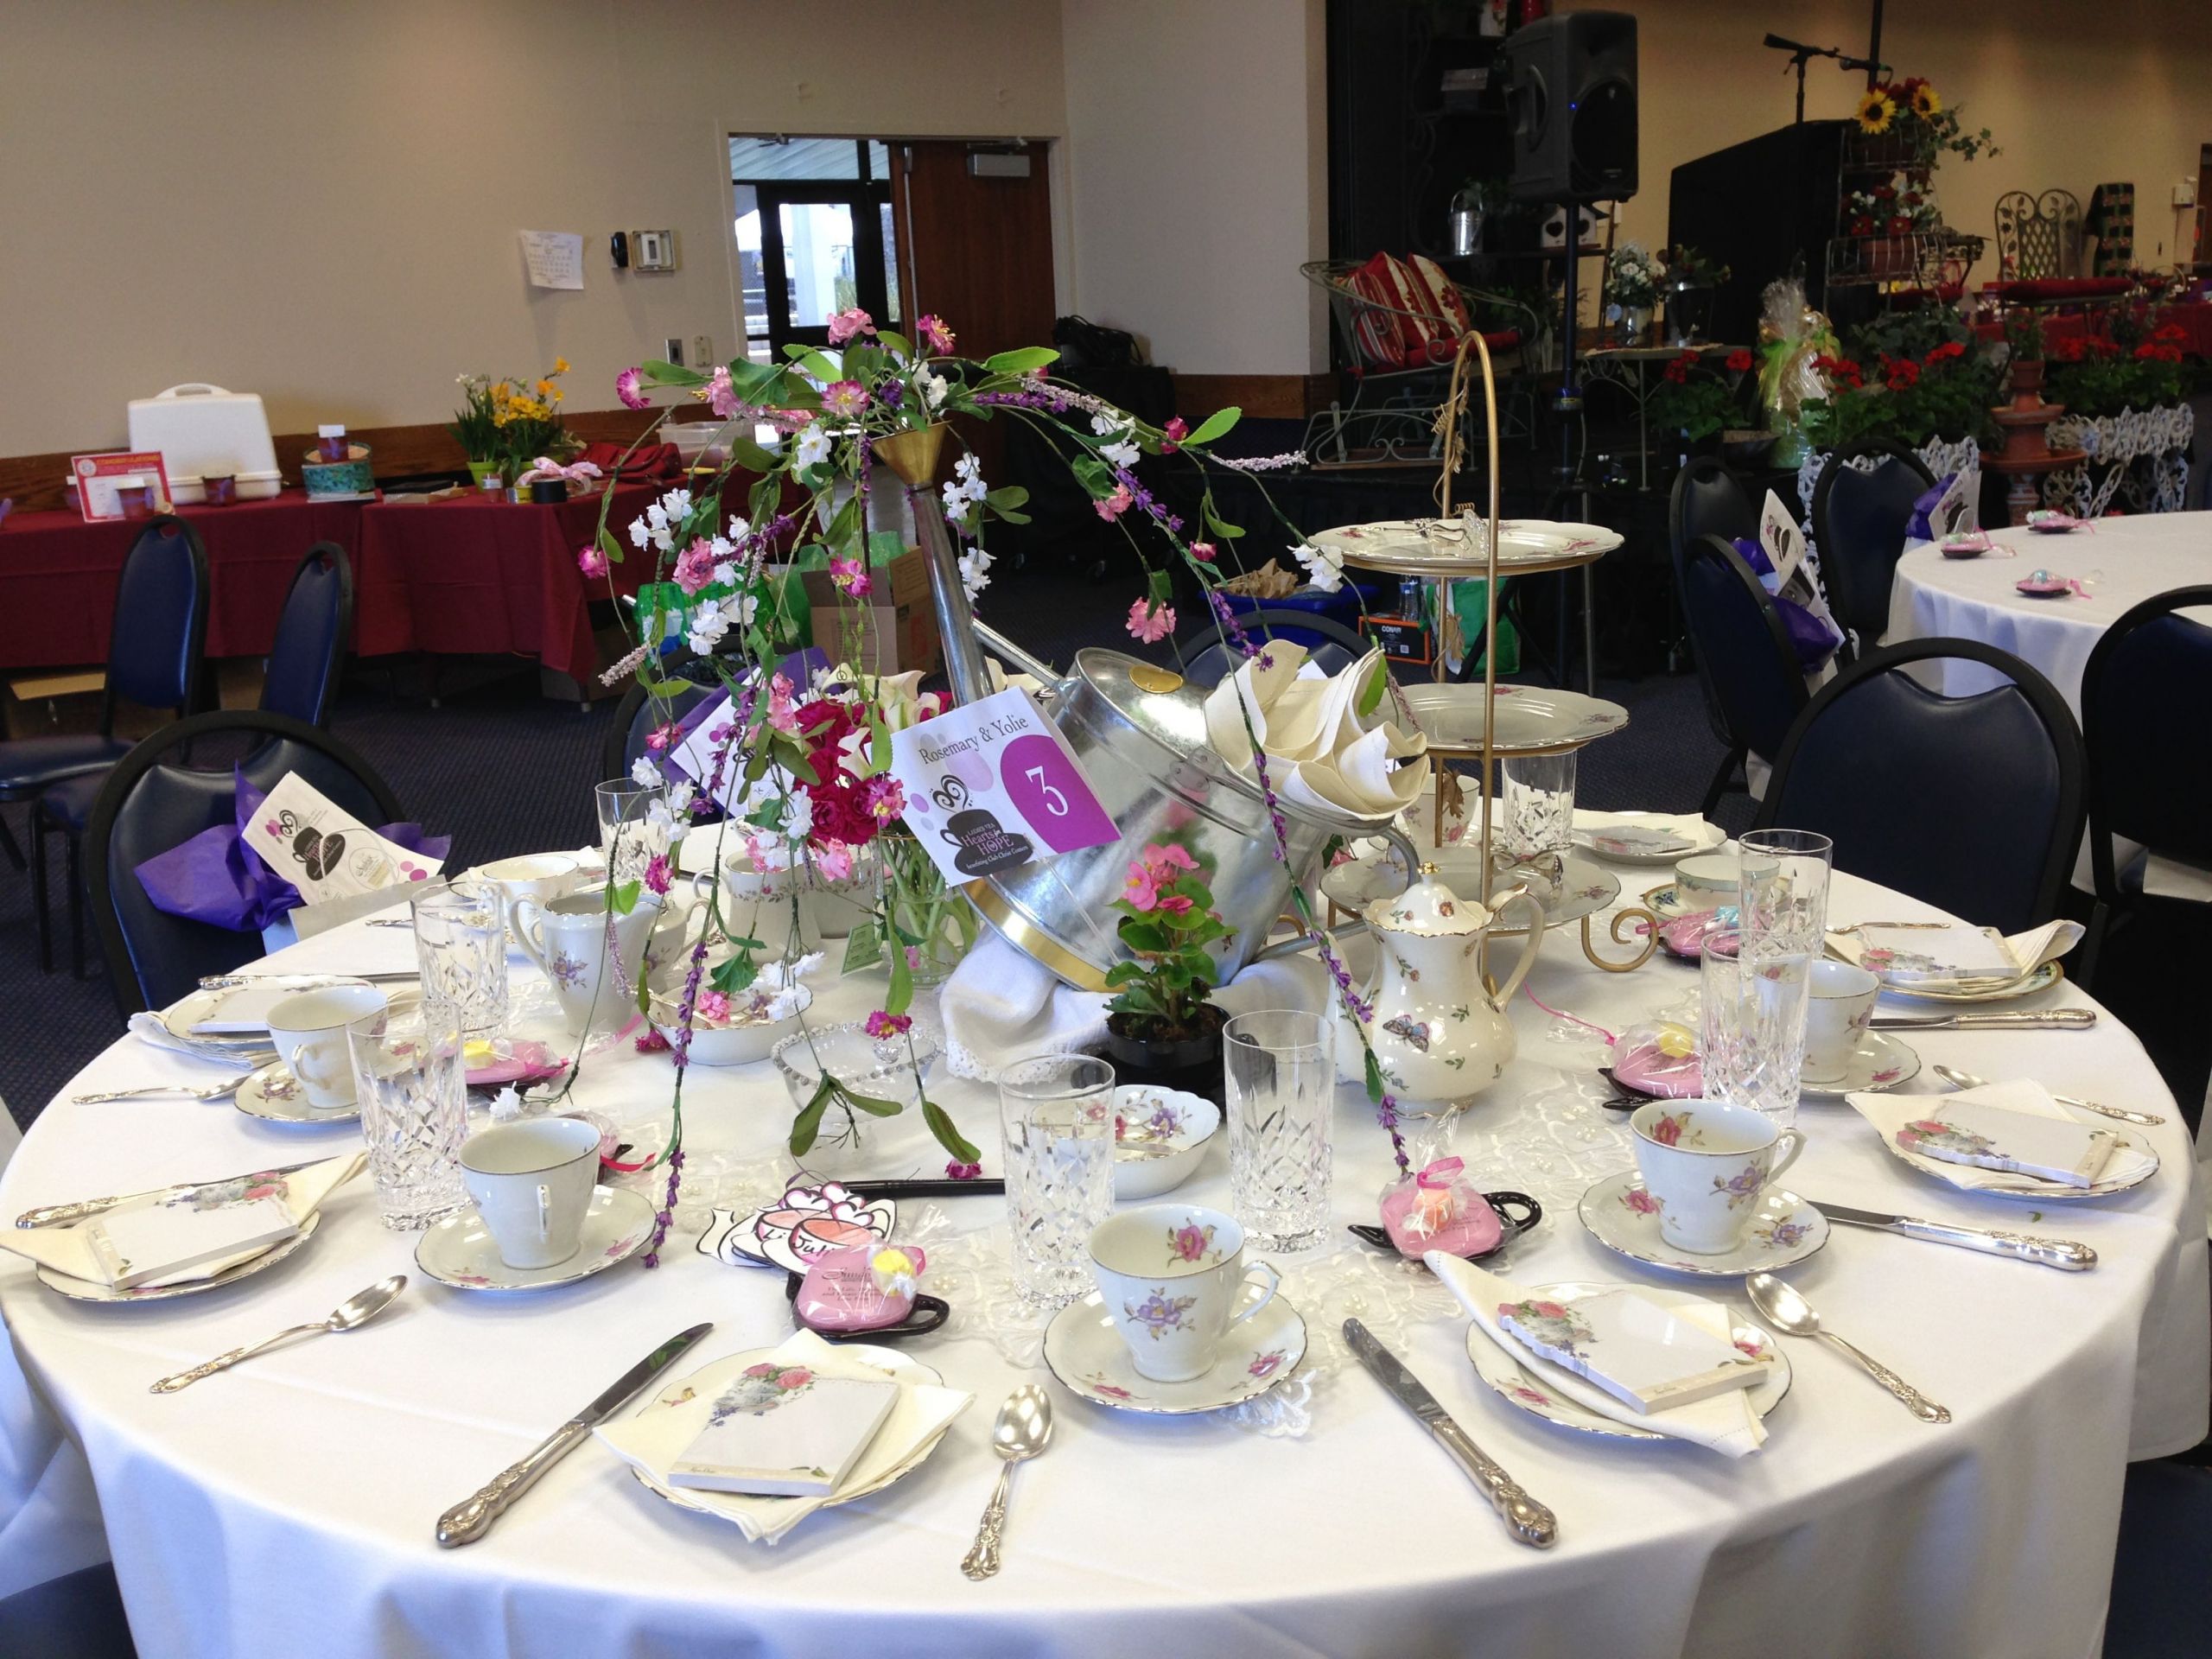 Ladies Tea Party Ideas
 Decorated for a la s Tea Party for charity "Club Christ